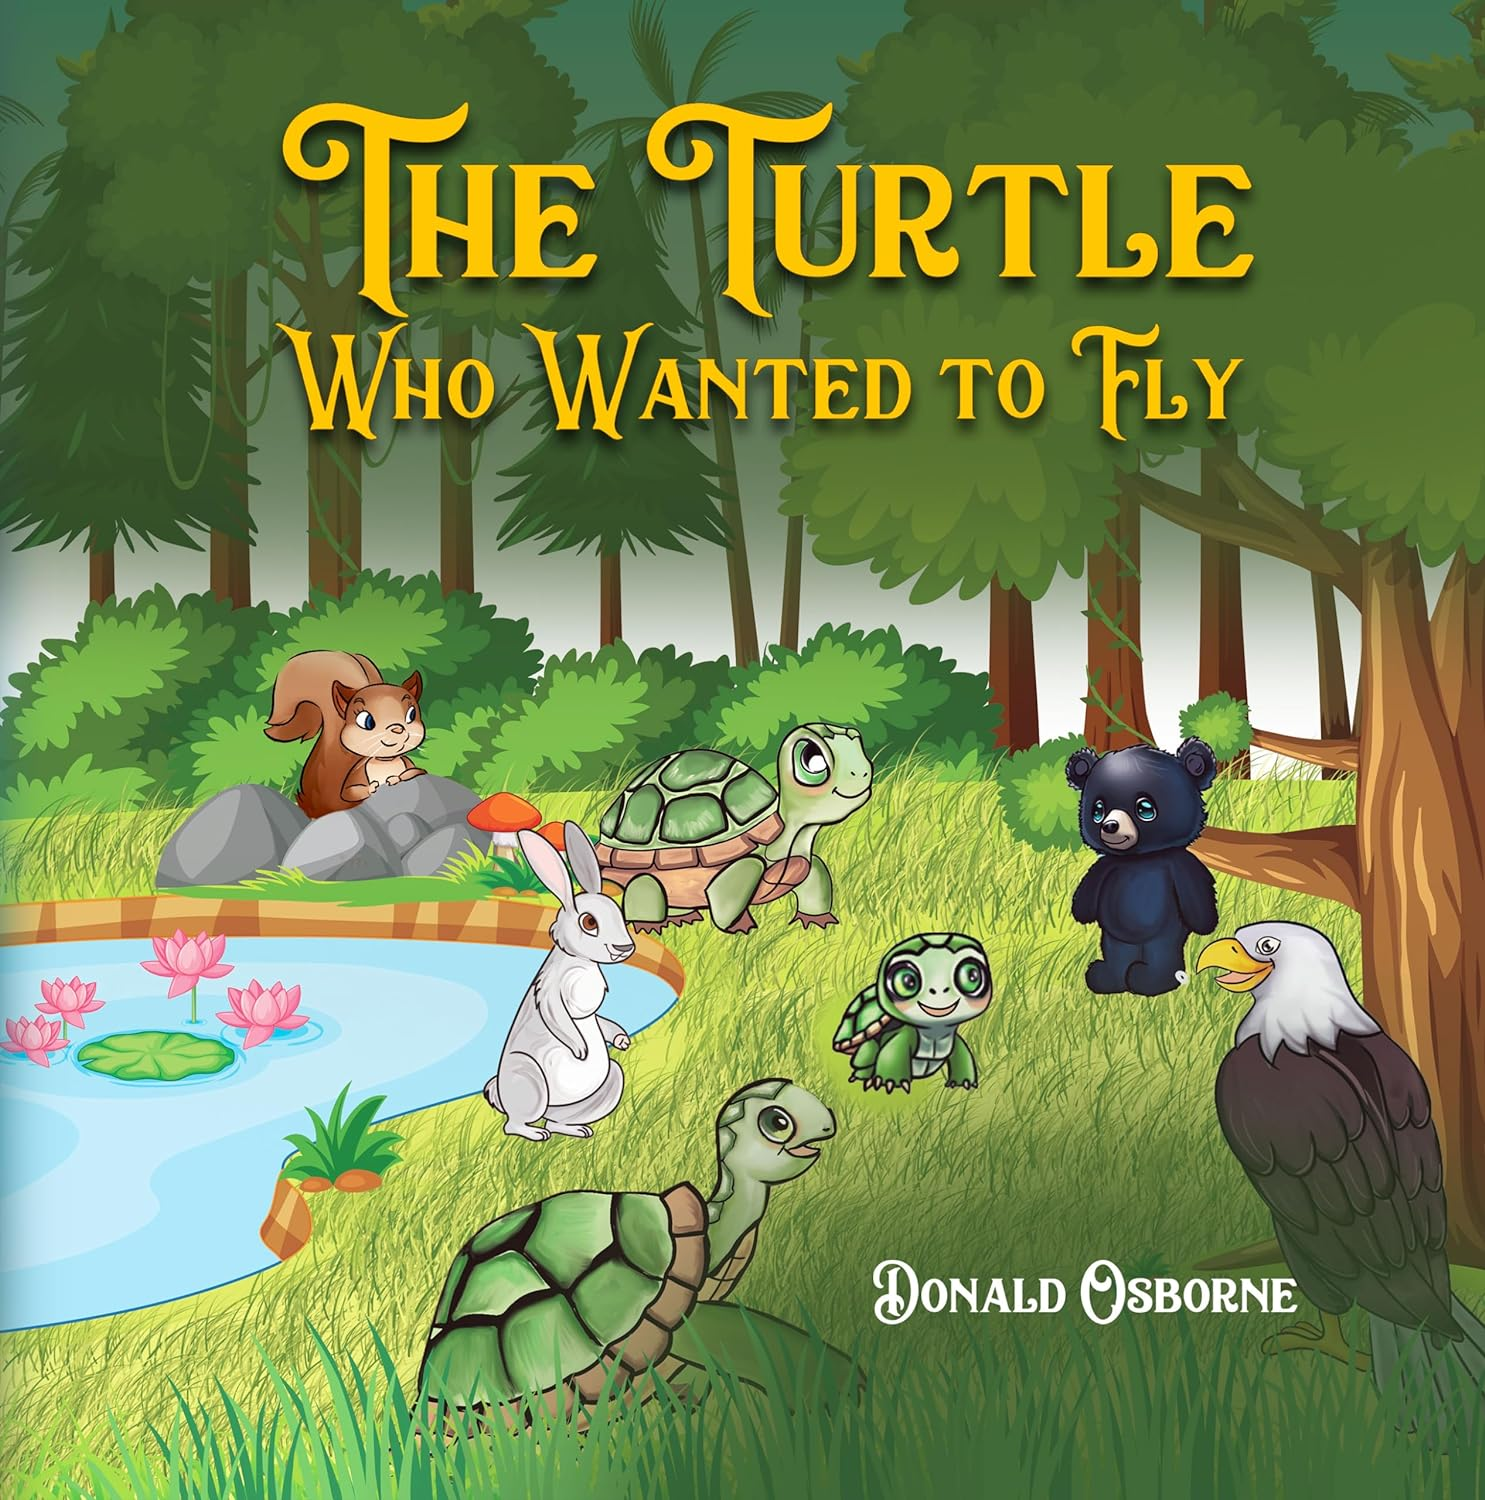 New Children's Book "The Turtle Who Wanted to Fly" by Don Osborne Soars into Hearts Everywhere, Inspiring Dreams and Friendship